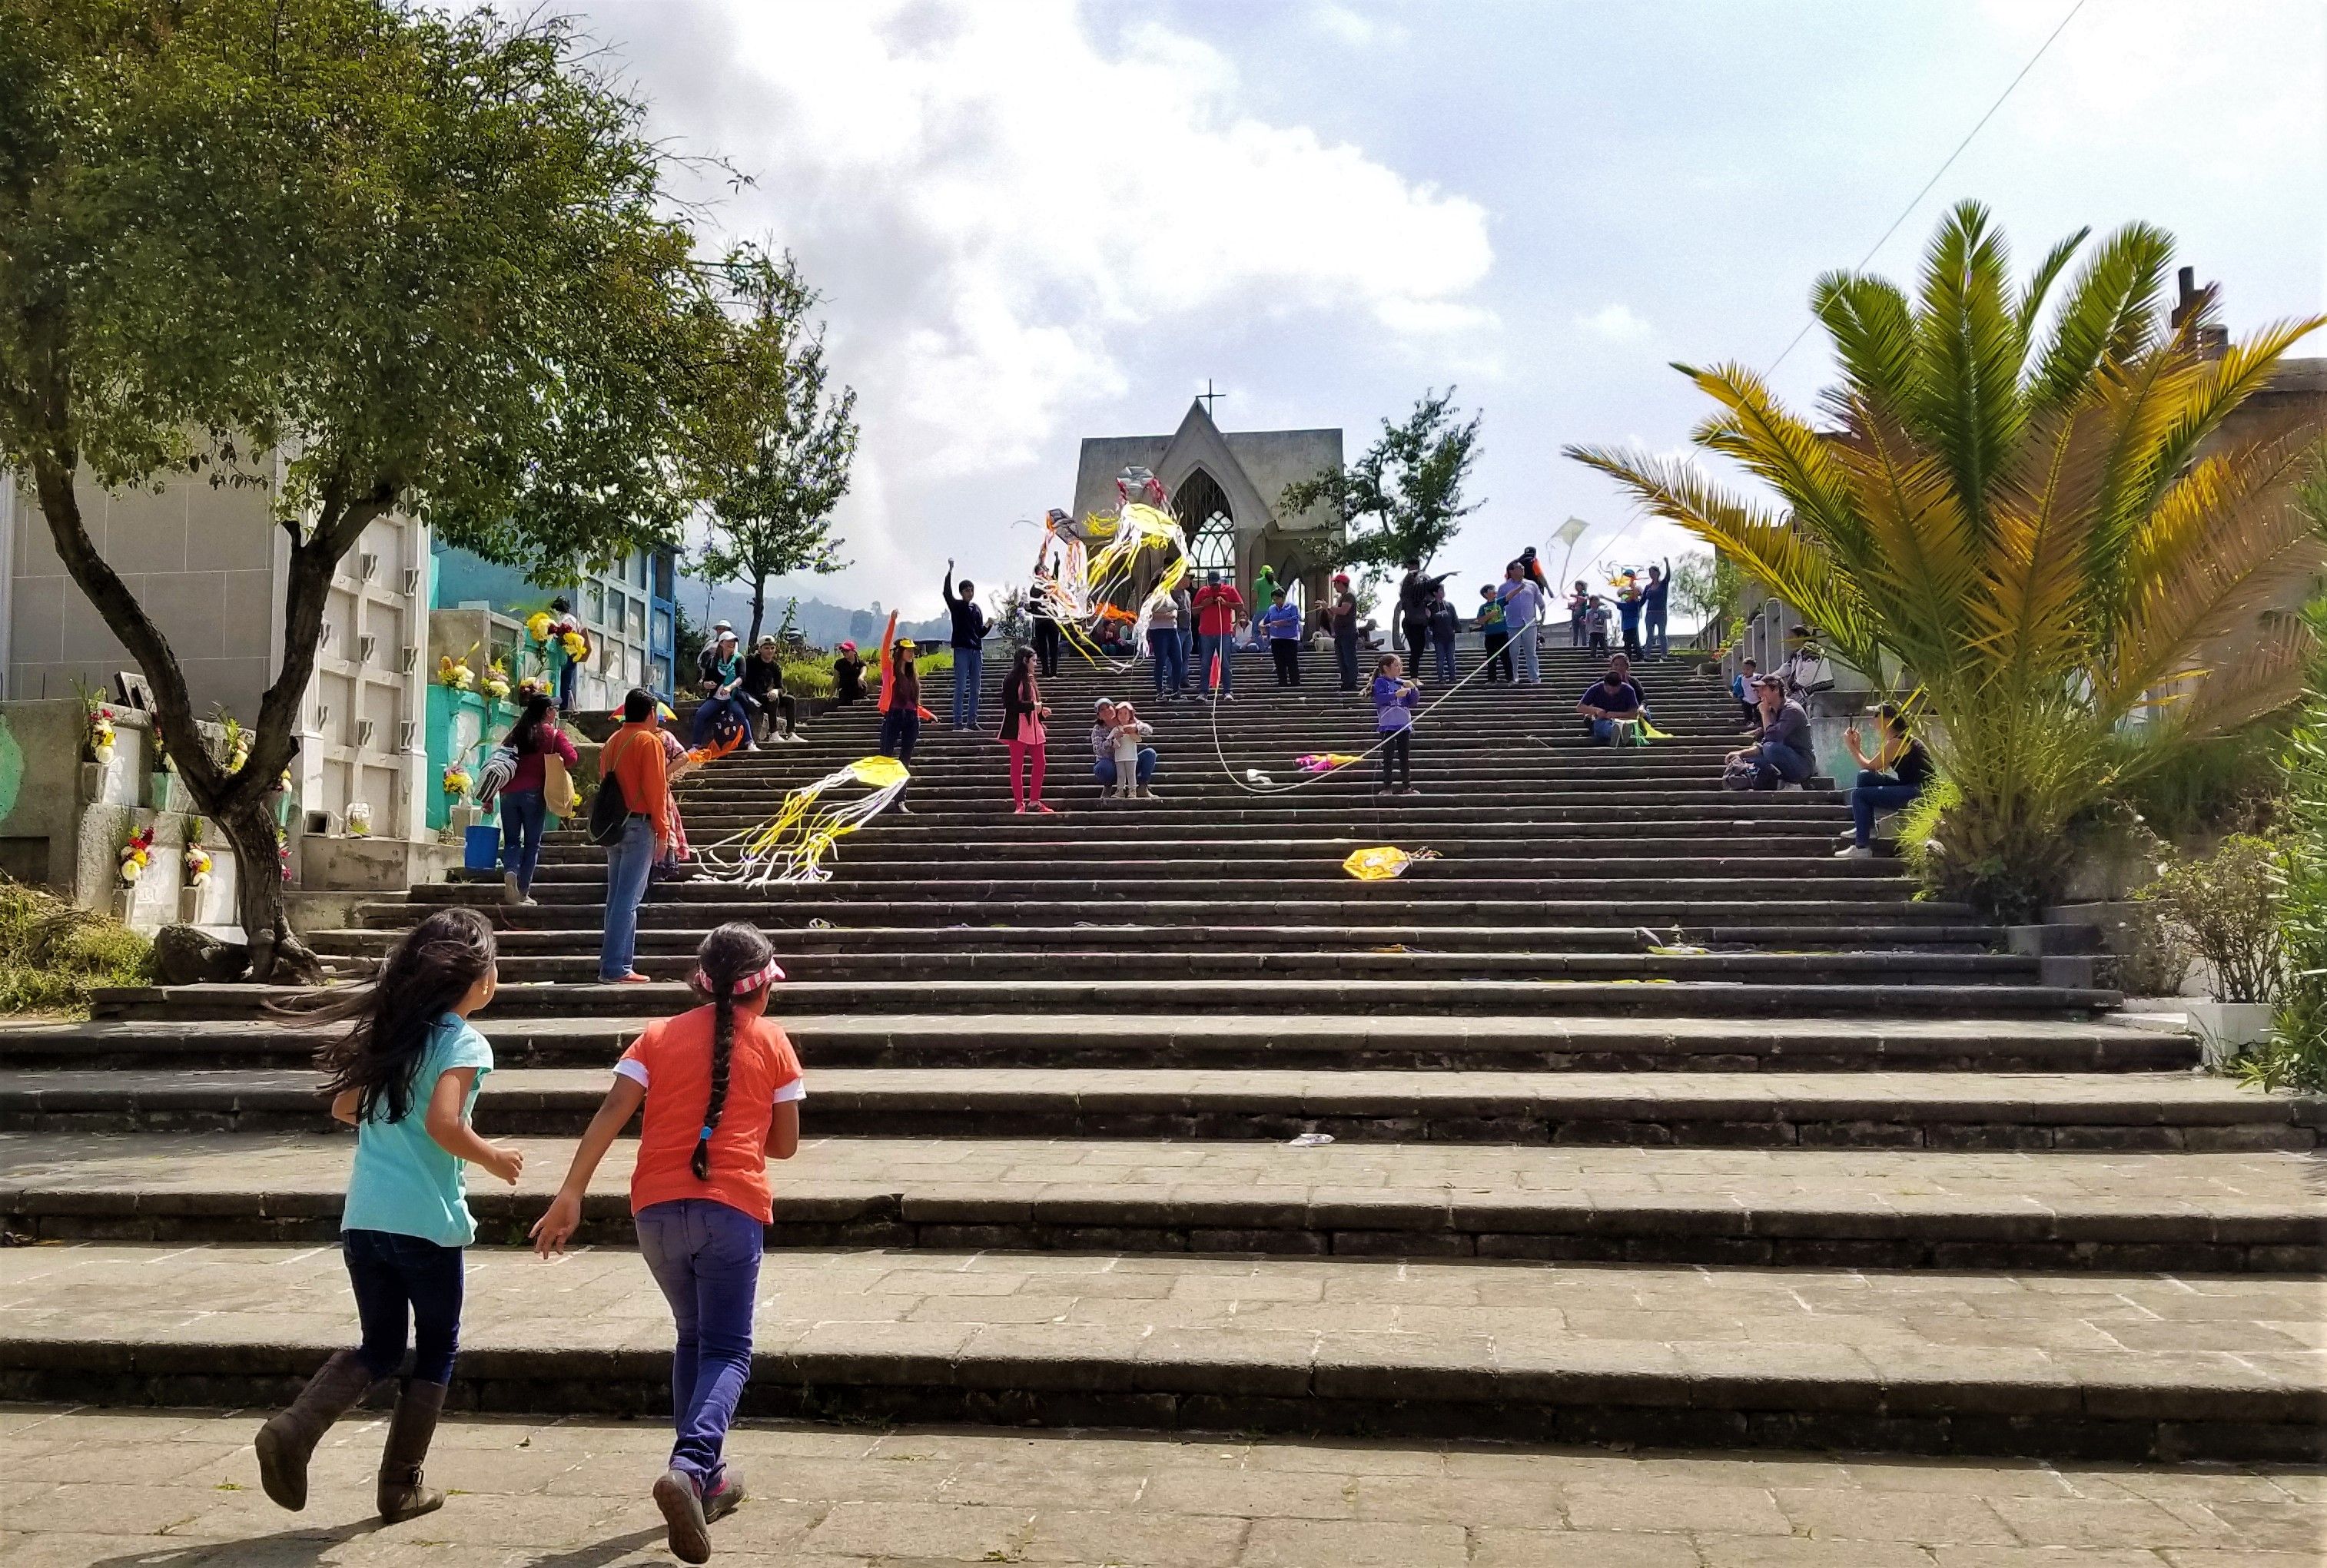 It is tradition for children to fly barriletes or kites atop the gravesites on Day of the Dead. Locals believe it helps the souls of those trapped in purgatory to ascend to the heavens. Image by Kristian Hernandez. Guatemala, 2018.